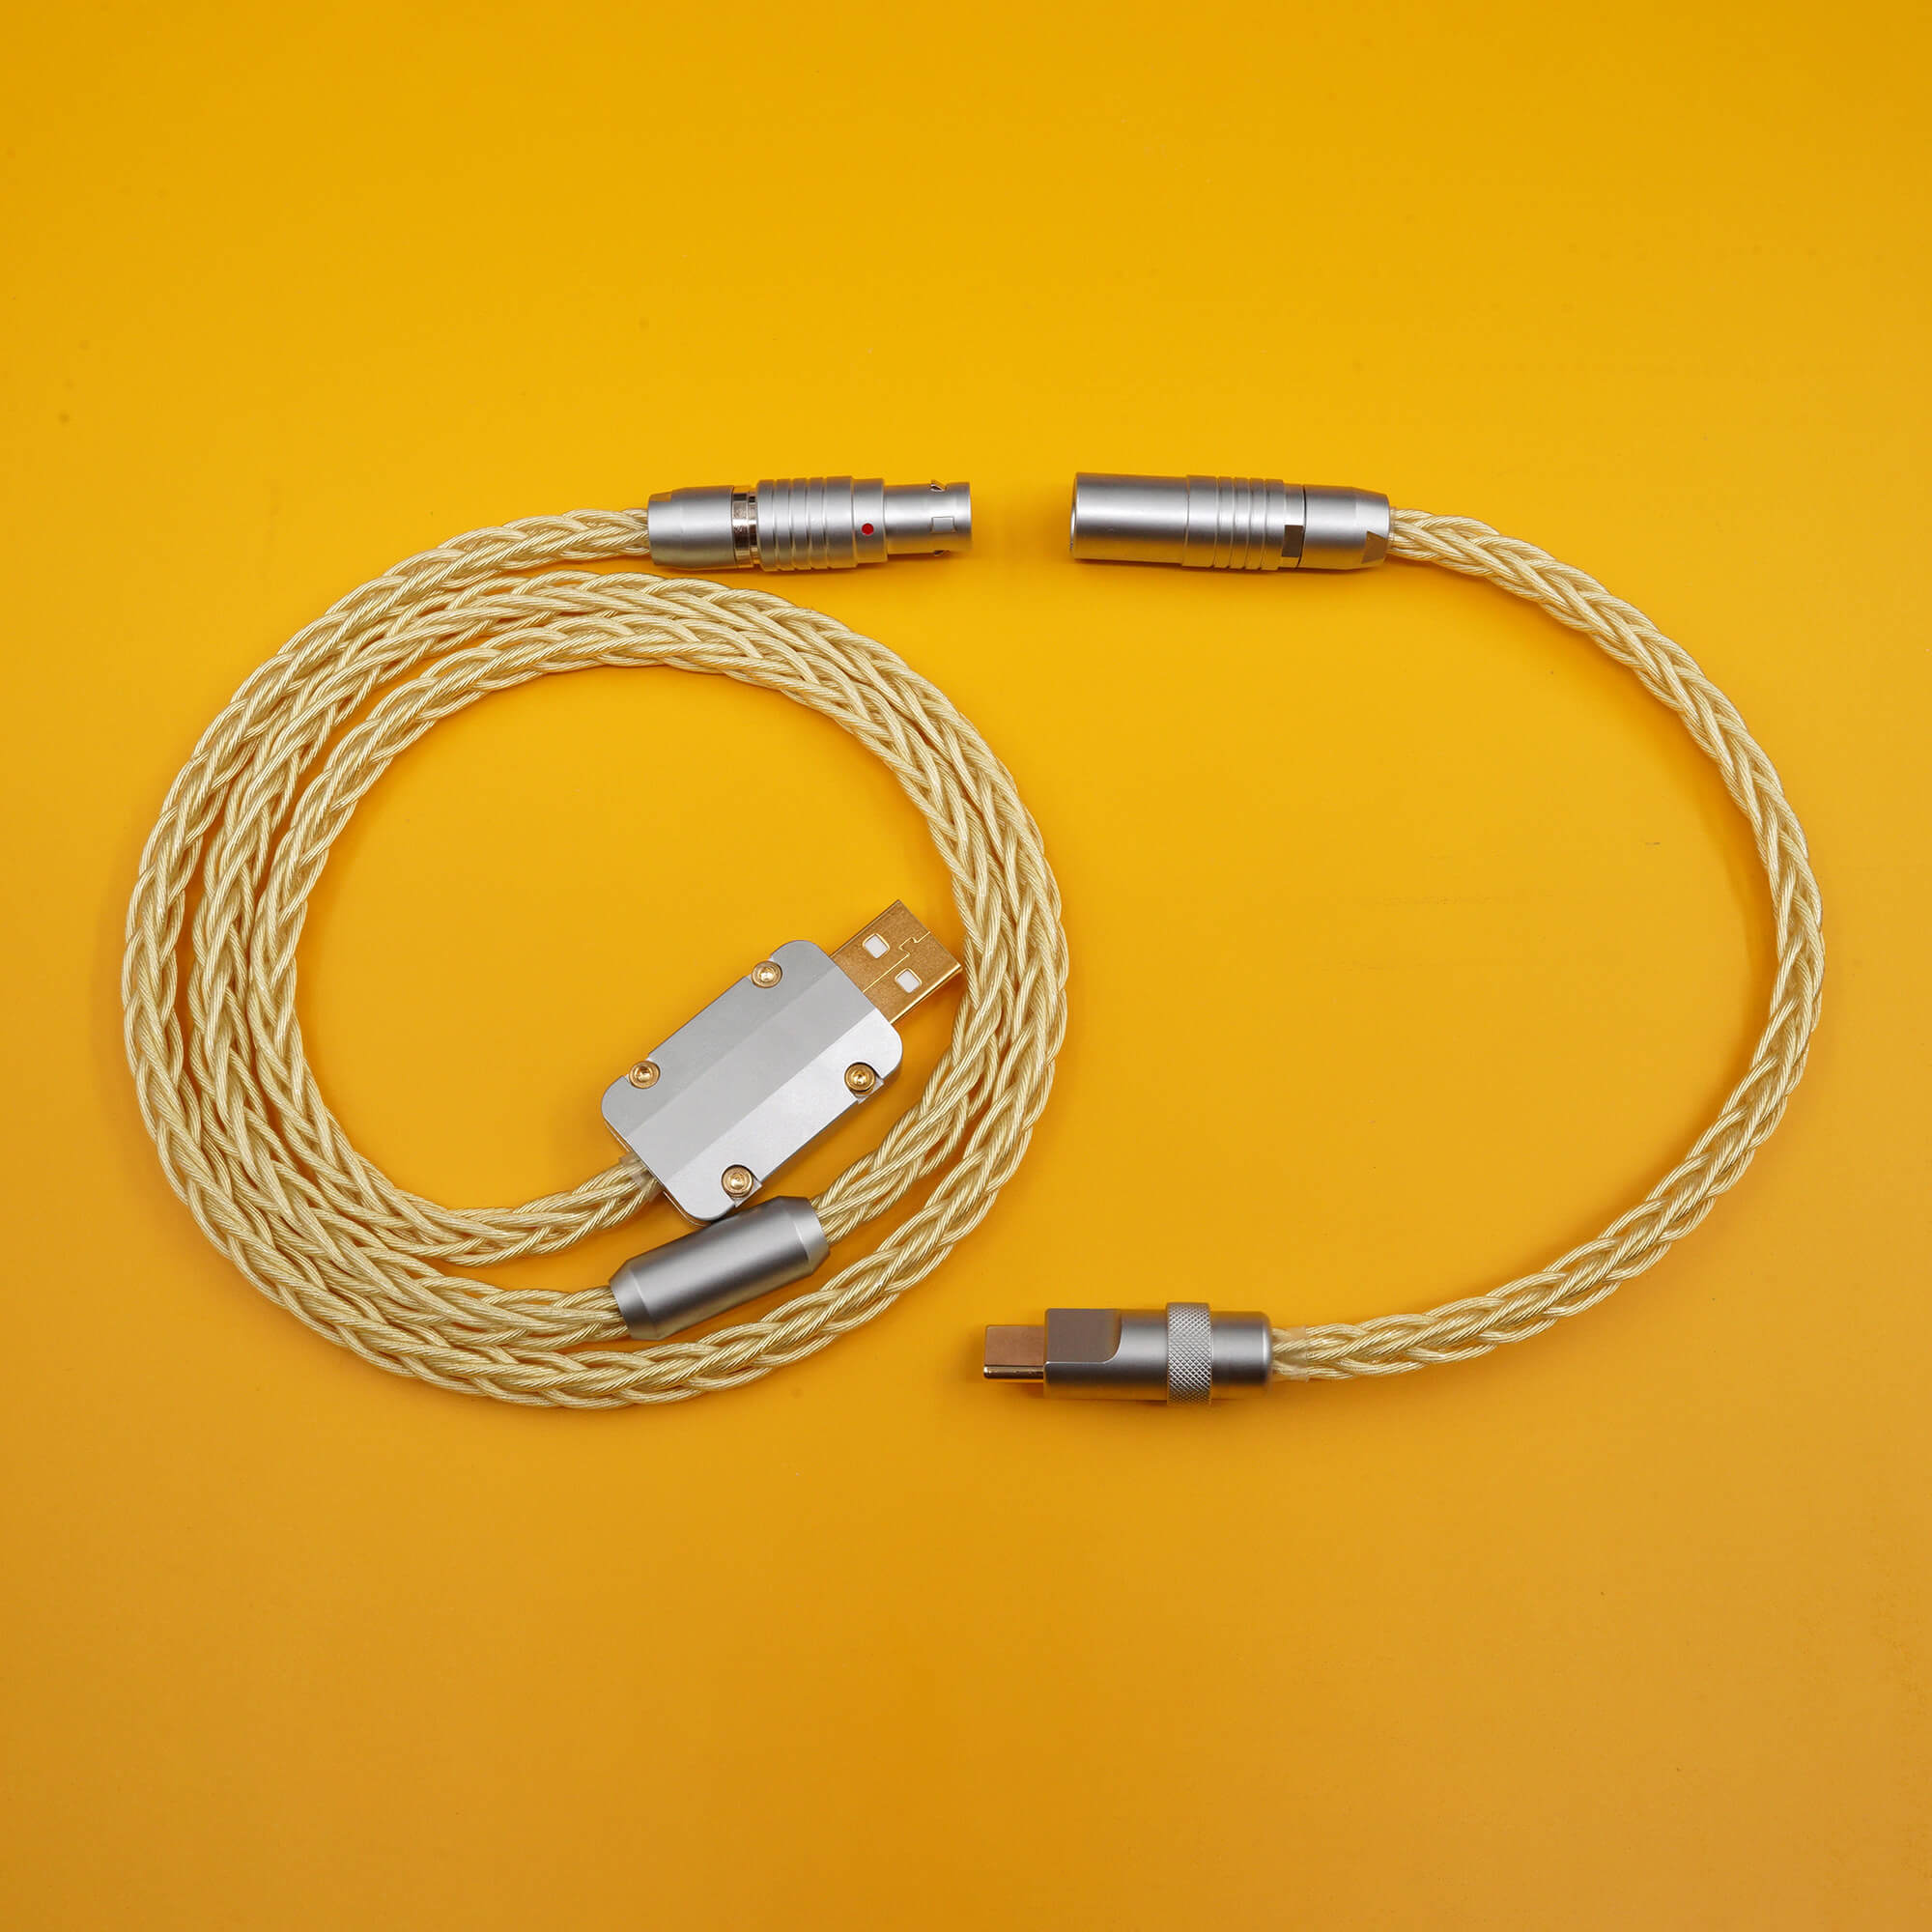 MelGeek Handmade Silver Jacketed Monocrystal Copper Wire USB Cable